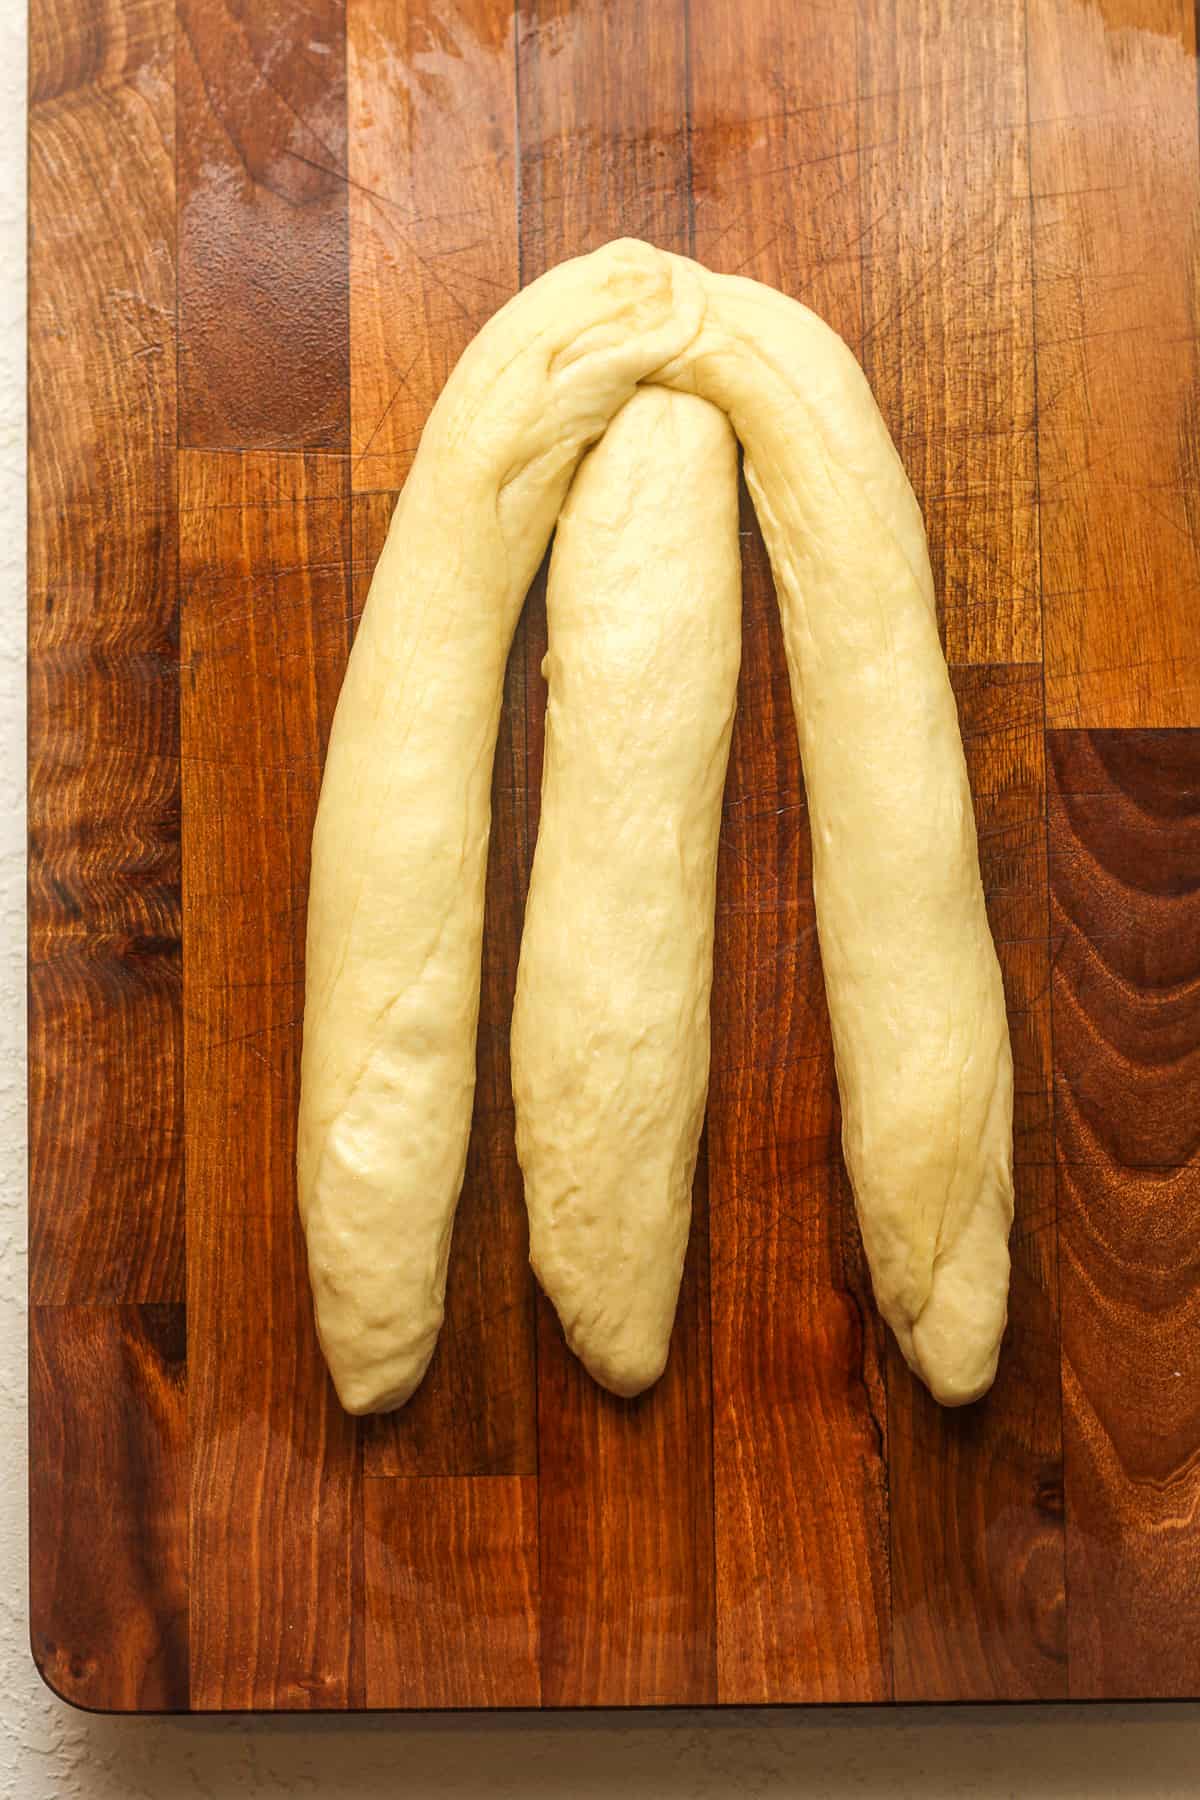 The dough showing the three braids pressed at the top.